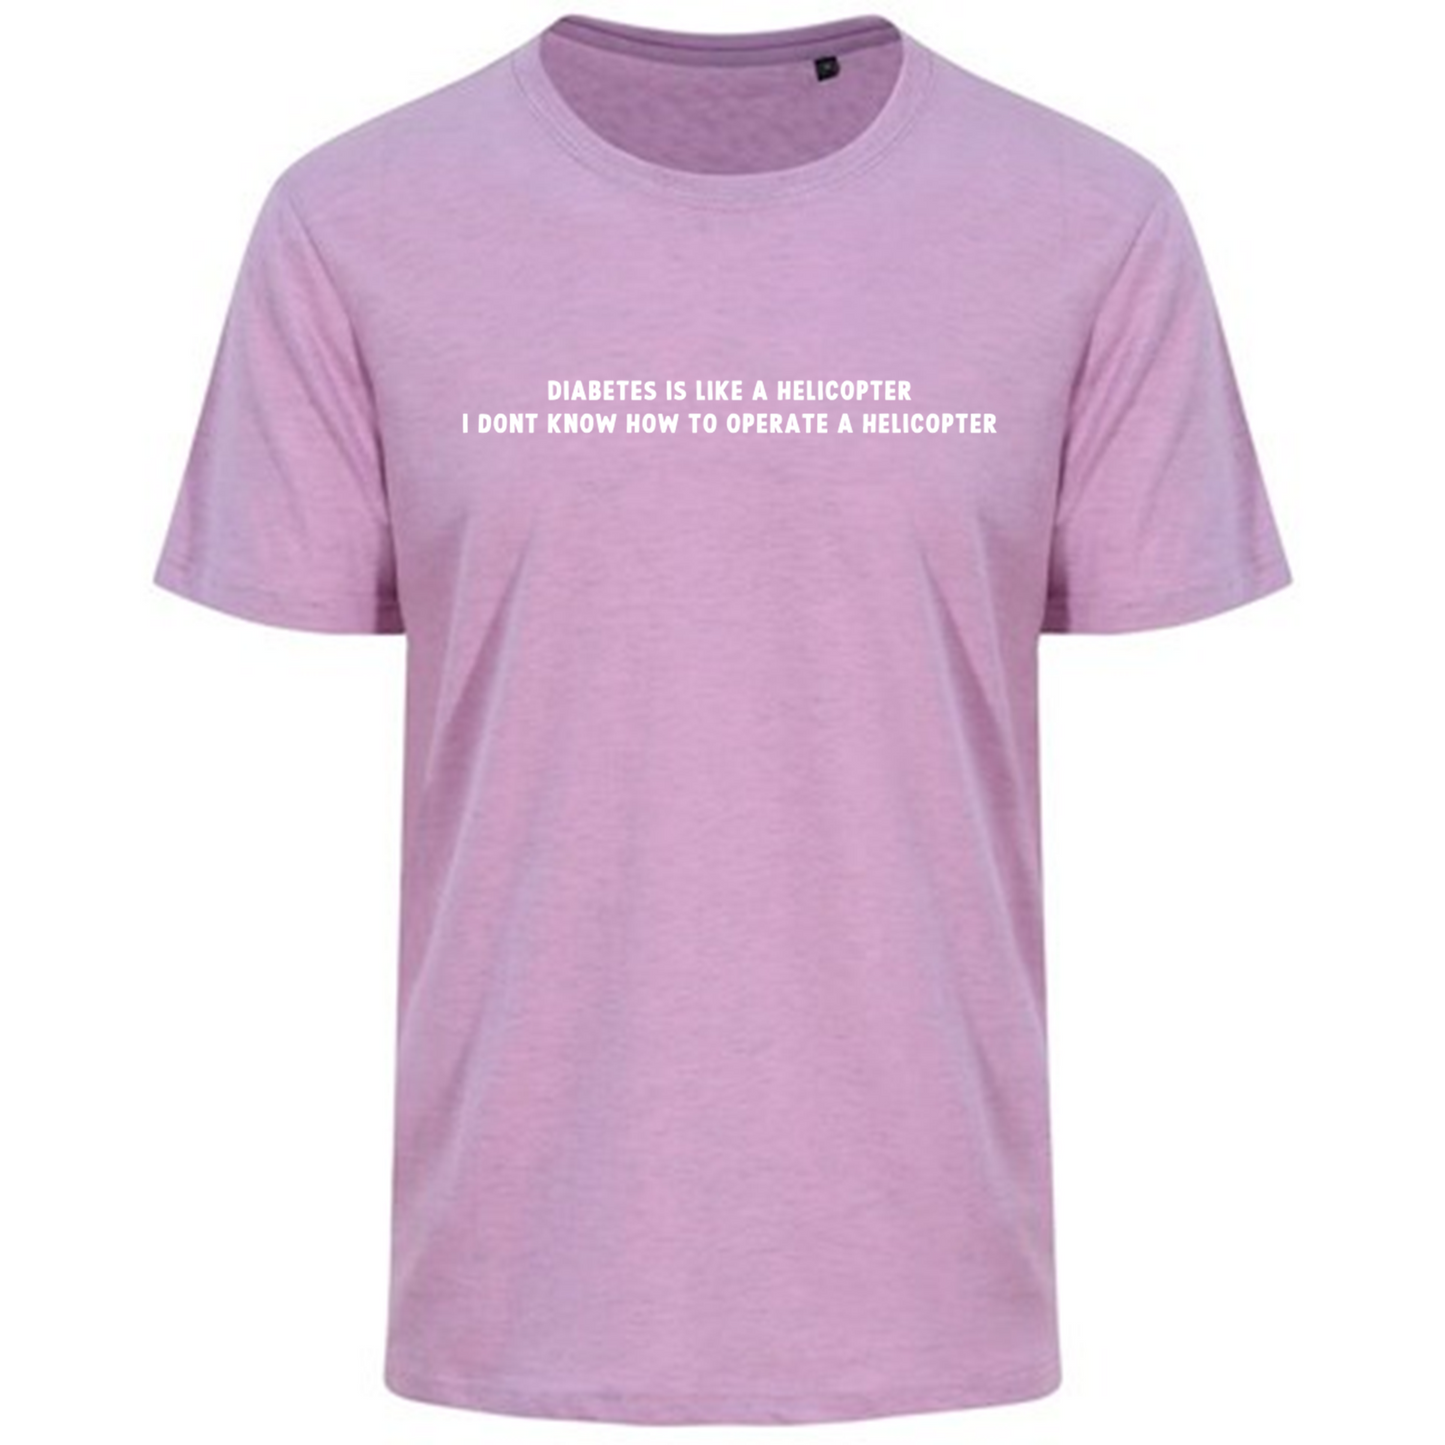 Diabetes Is Like A Helicopter, I Dont Know How To Operate A Helicopter Pastel T-Shirt